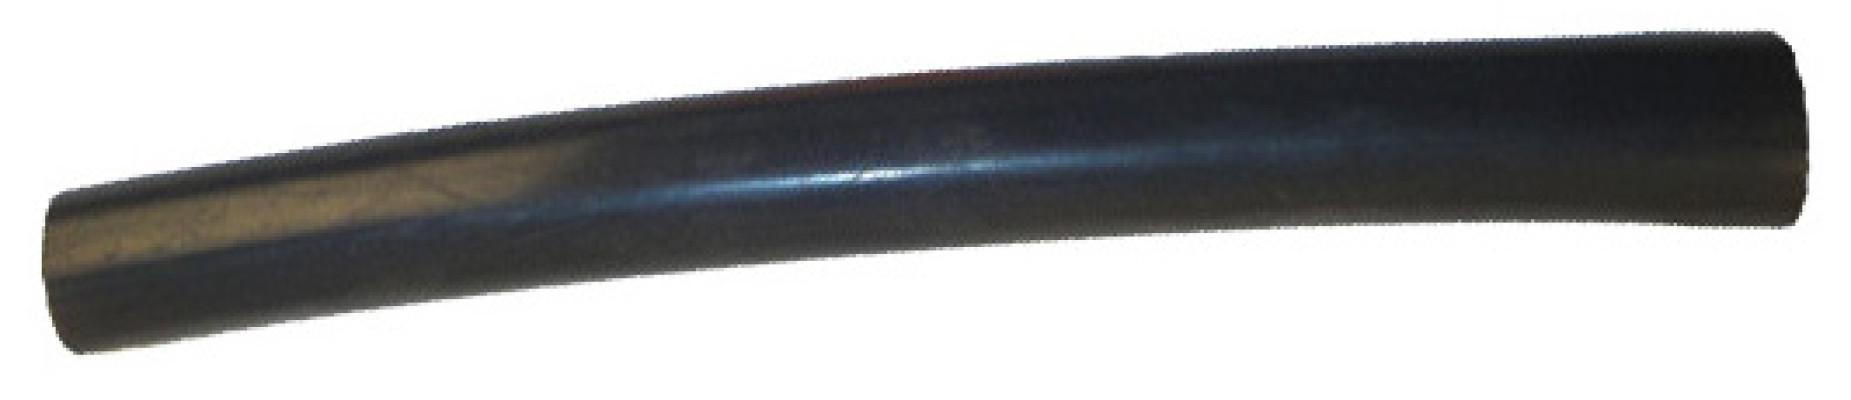 Image of A/C Compressor Clutch Connector from Sunair. Part number: PT-7005